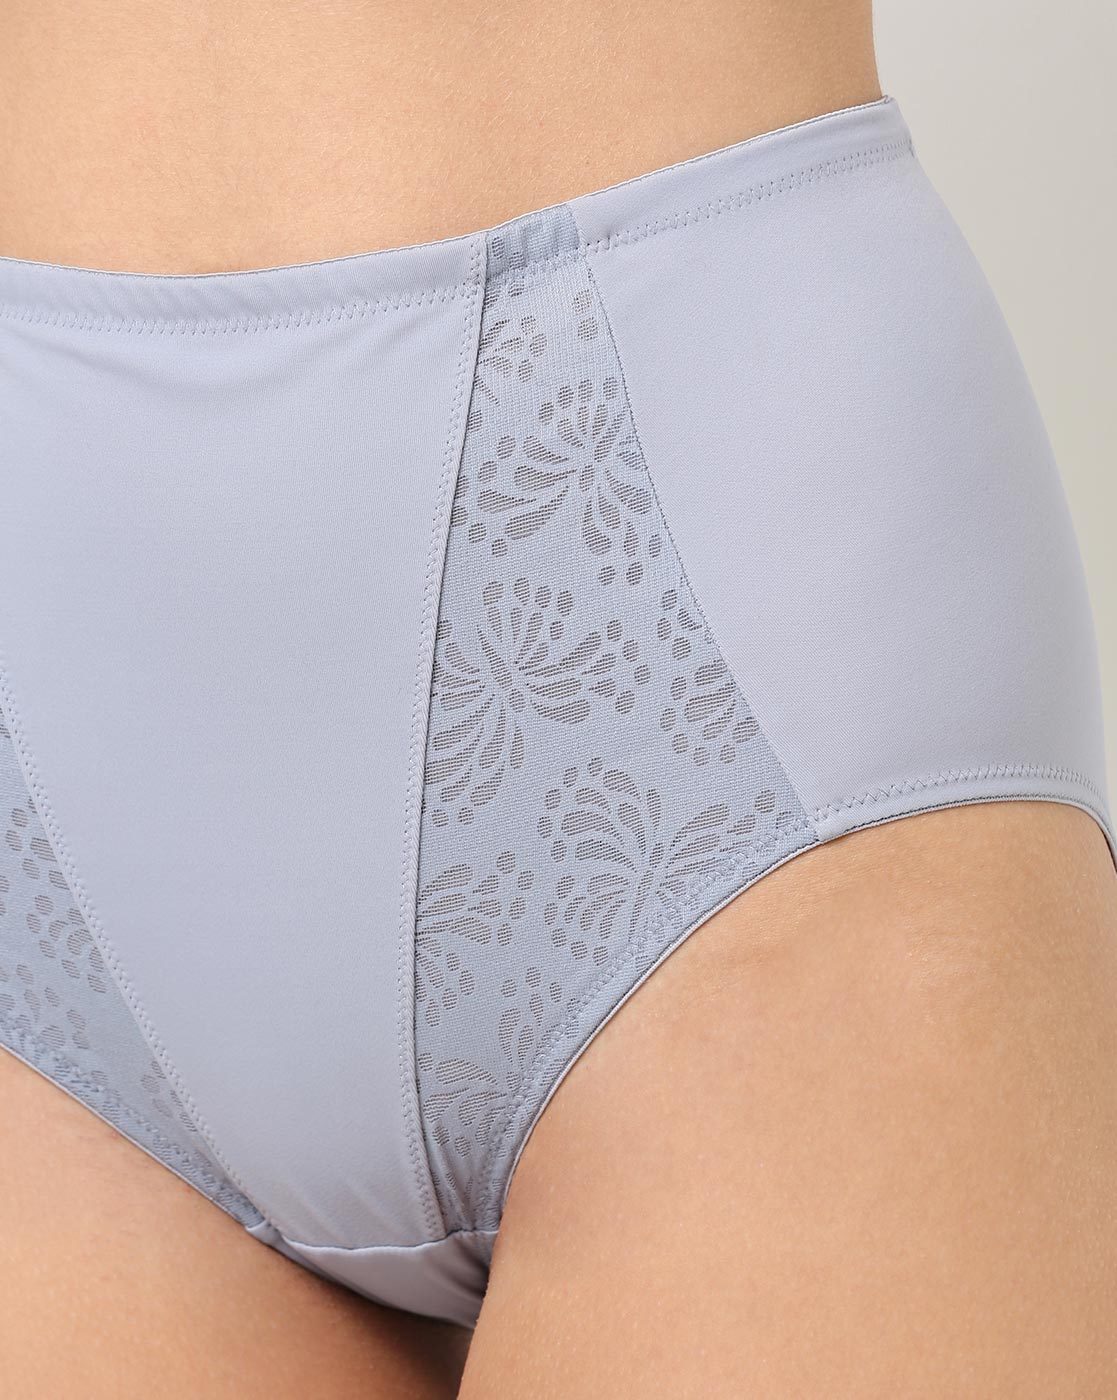 Buy Grey Panties for Women by TRIUMPH Online